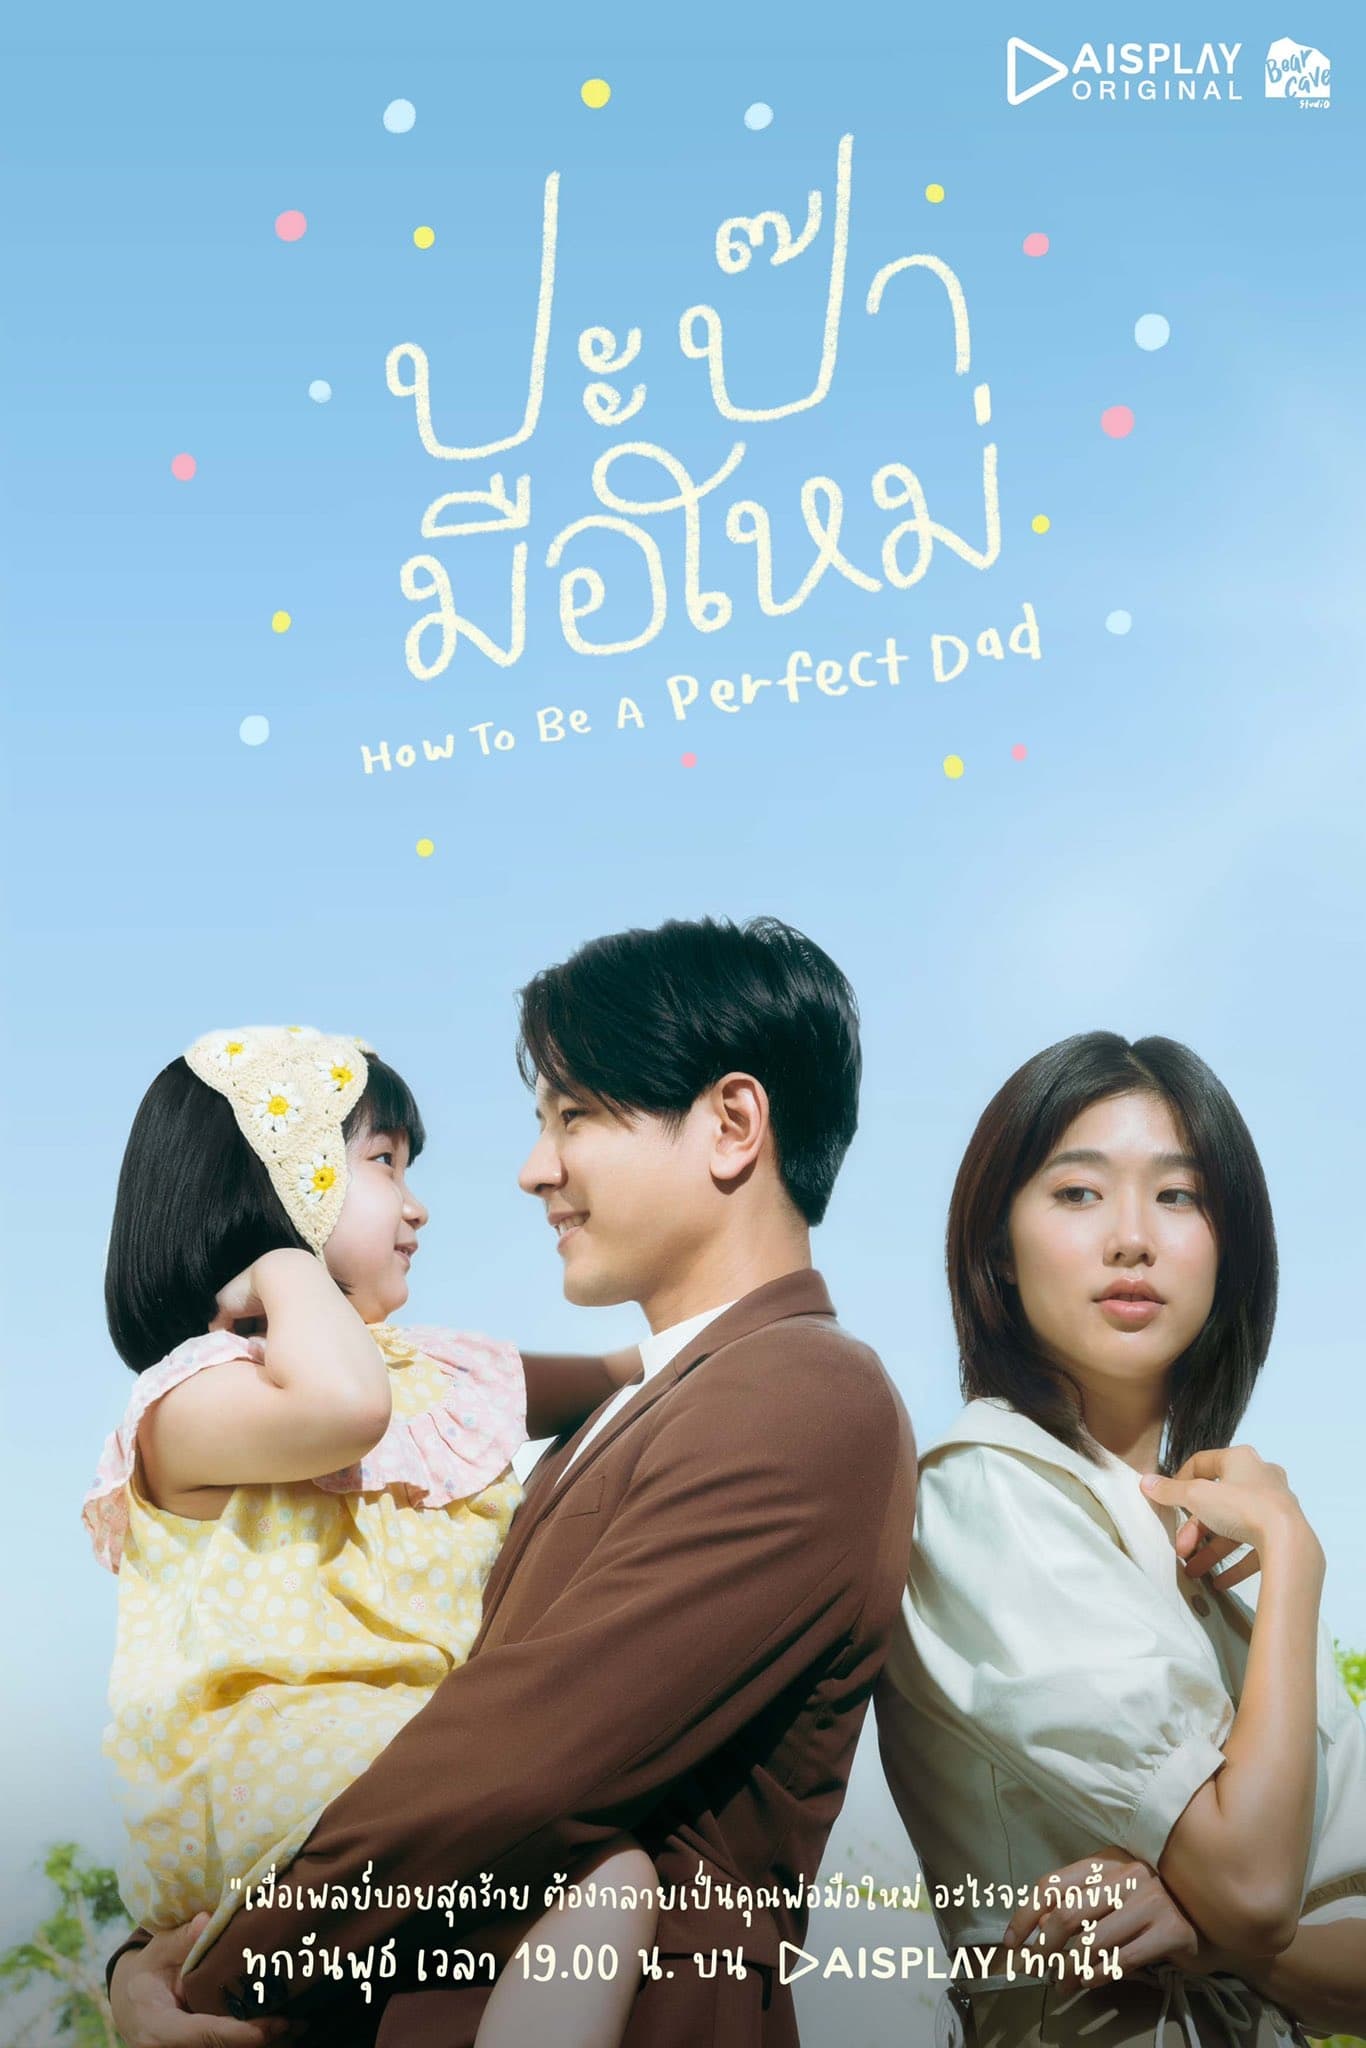 TV ratings for How To Be A Perfect Dad (ปะป๊ามือใหม่) in Philippines. AIS Play TV series